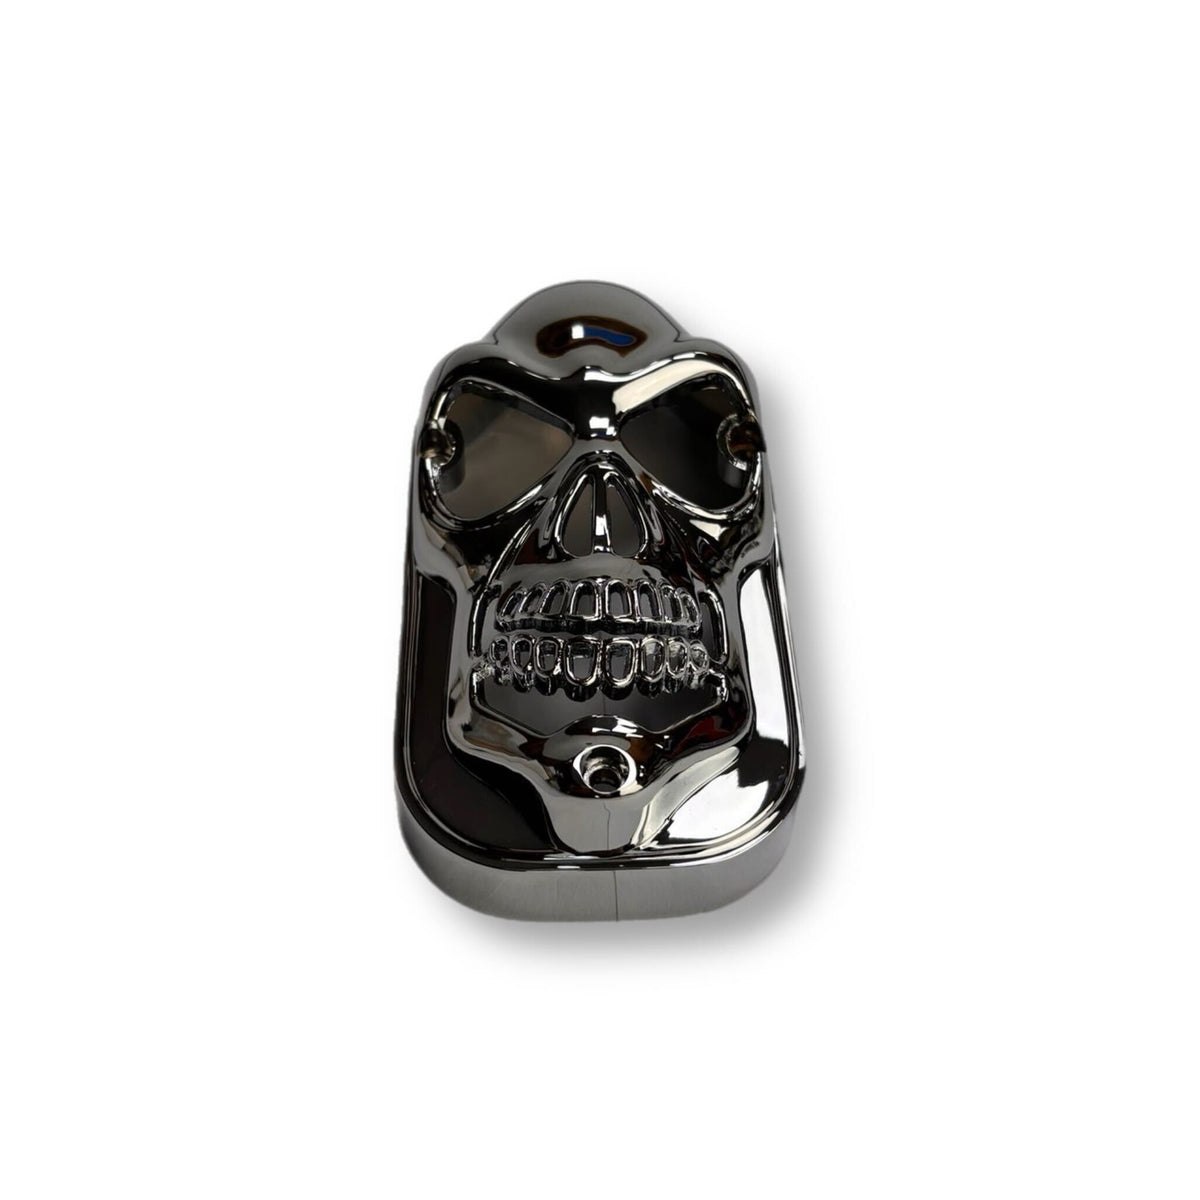 Chrome Metal Tombstone Light Skull Cover - Fits over Tombstone Lens